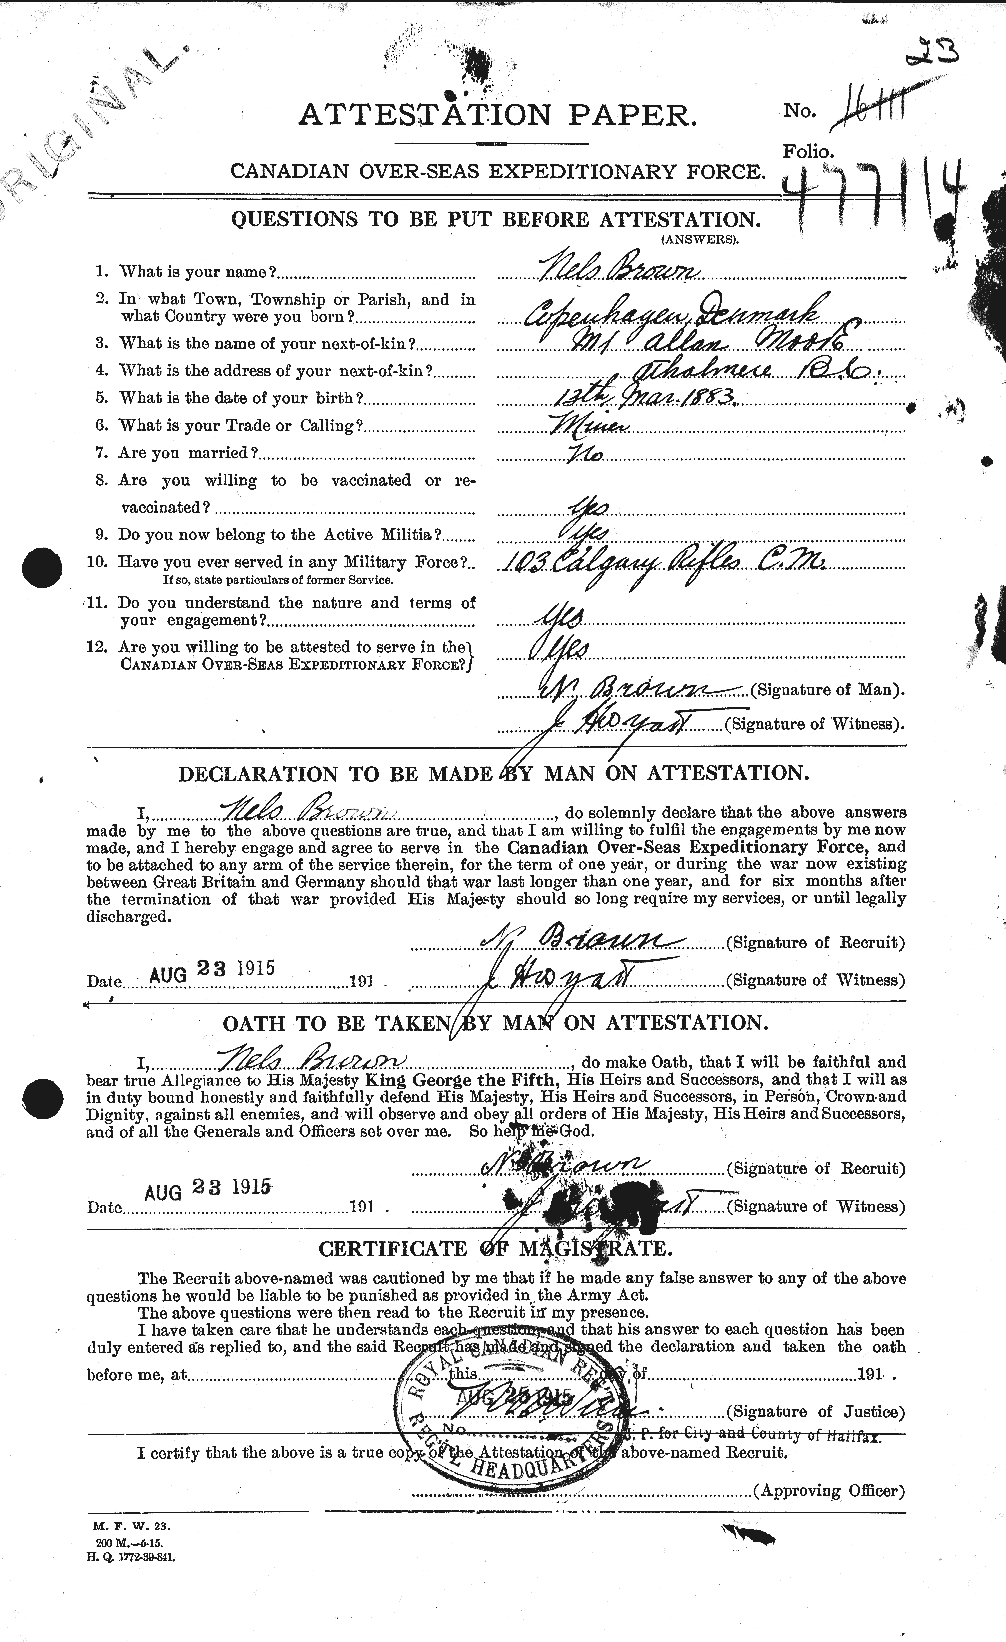 Personnel Records of the First World War - CEF 267094a